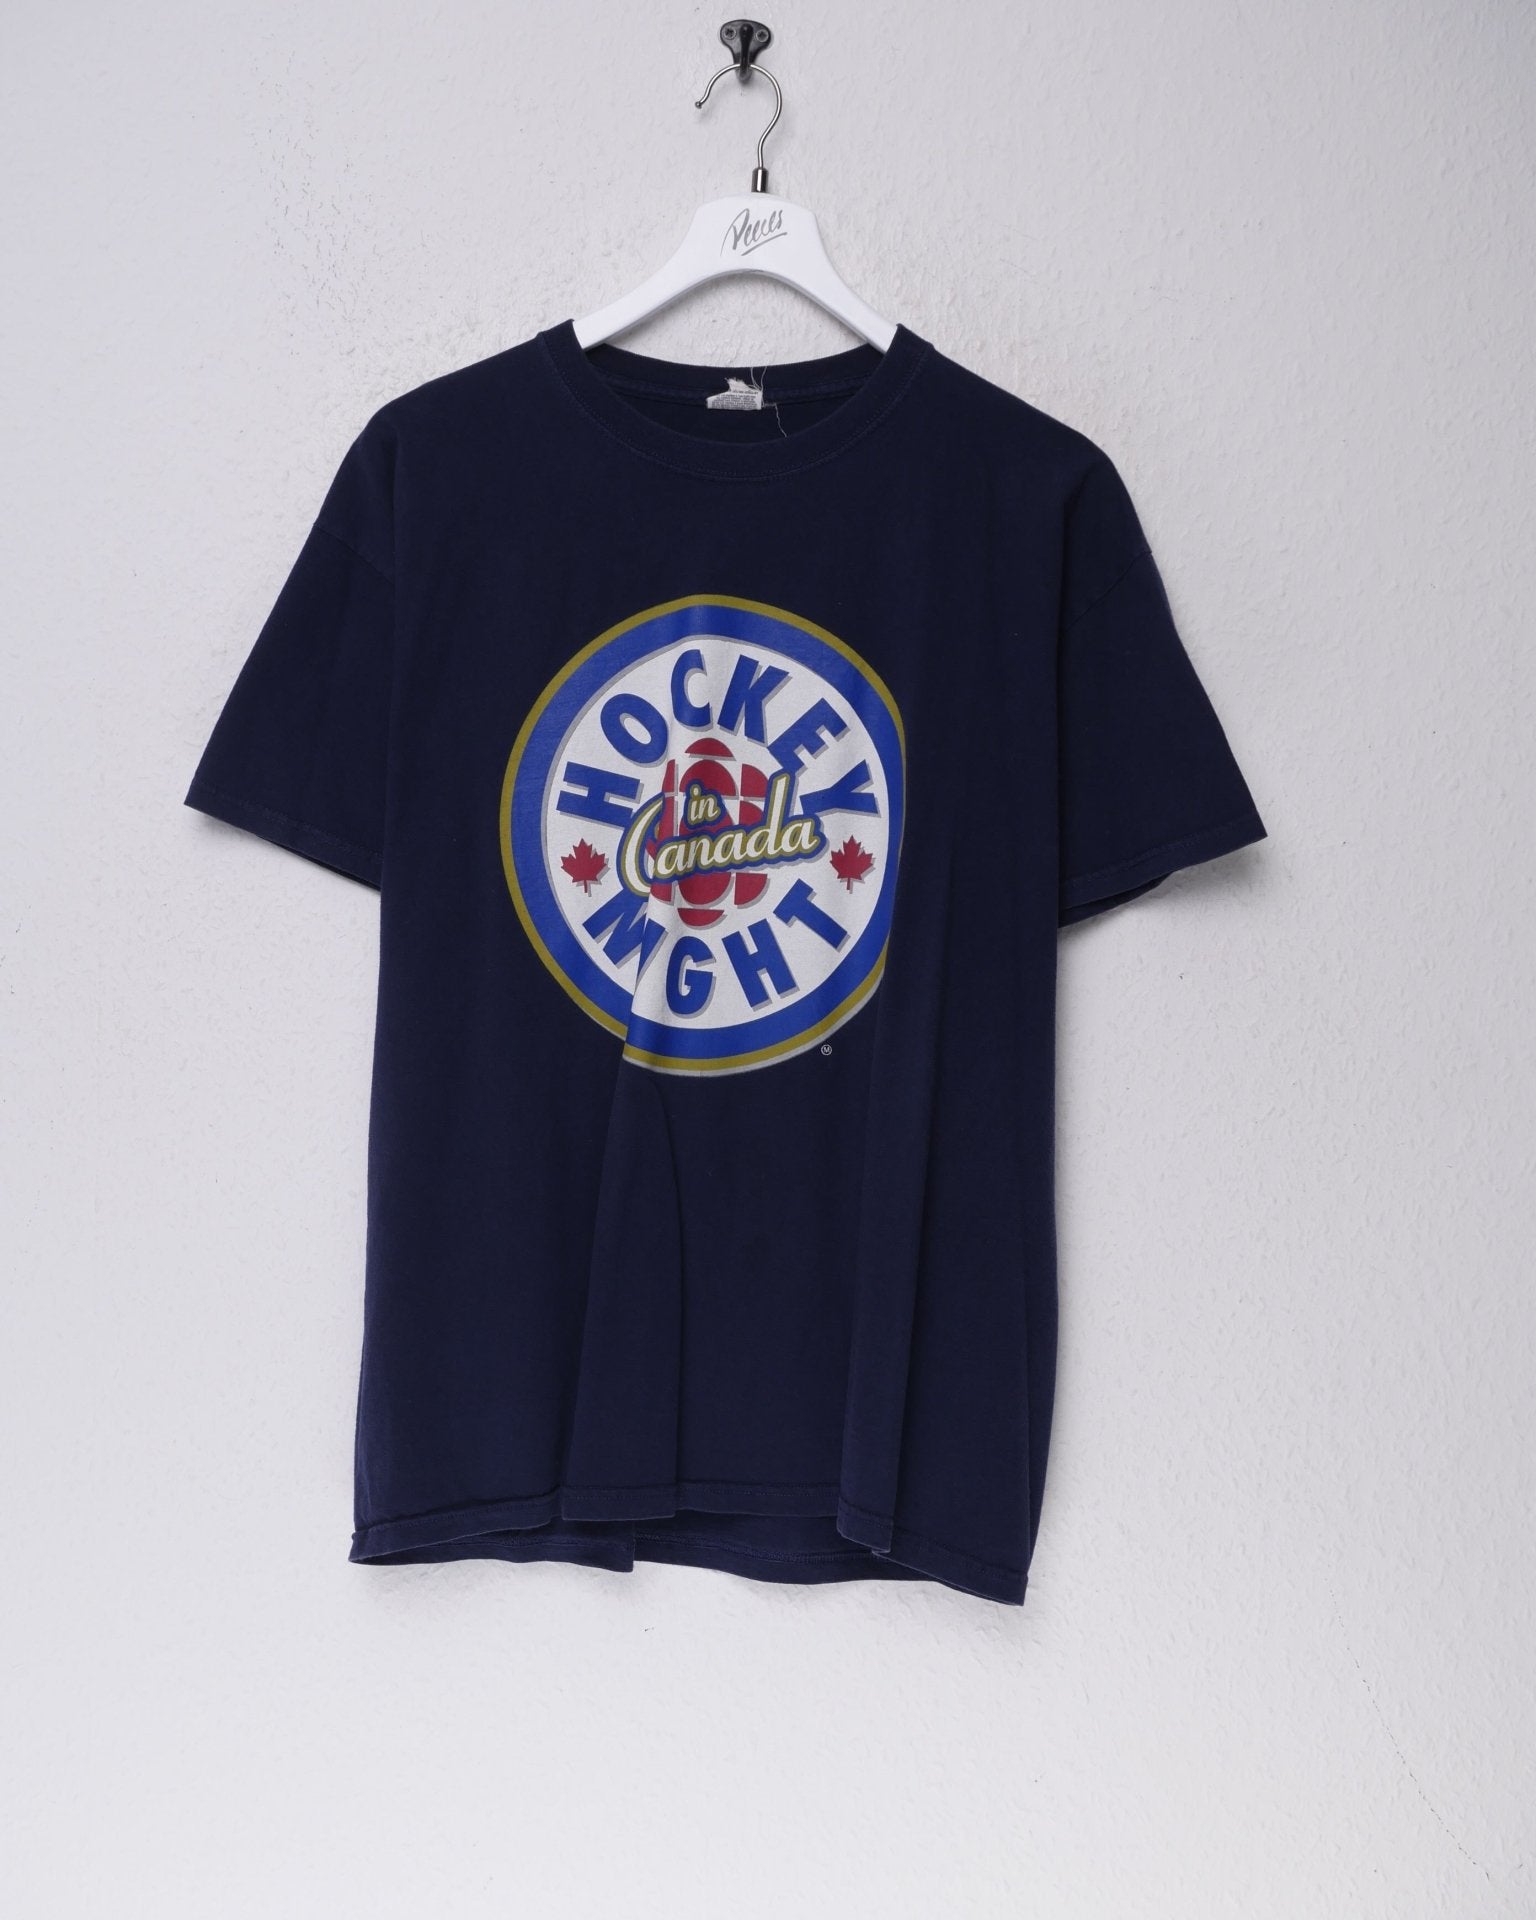 'Hockey in Canada' printed Graphic navy Shirt - Peeces